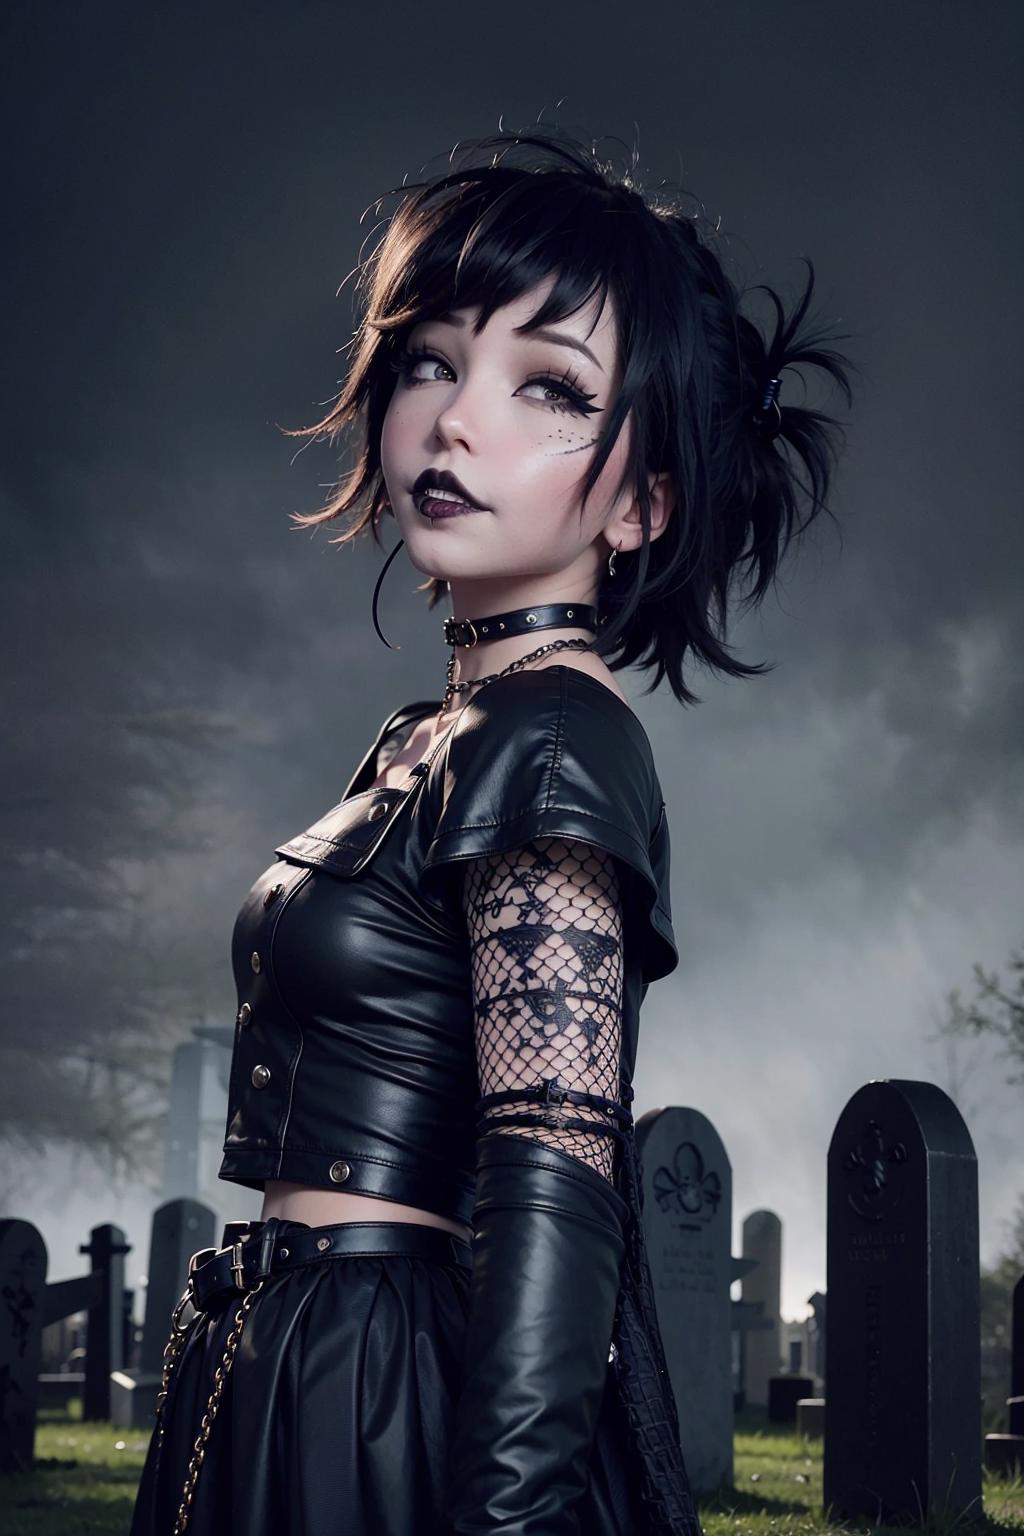 A woman with black hair, a black top, and heavy makeup standing in front of a cemetery.